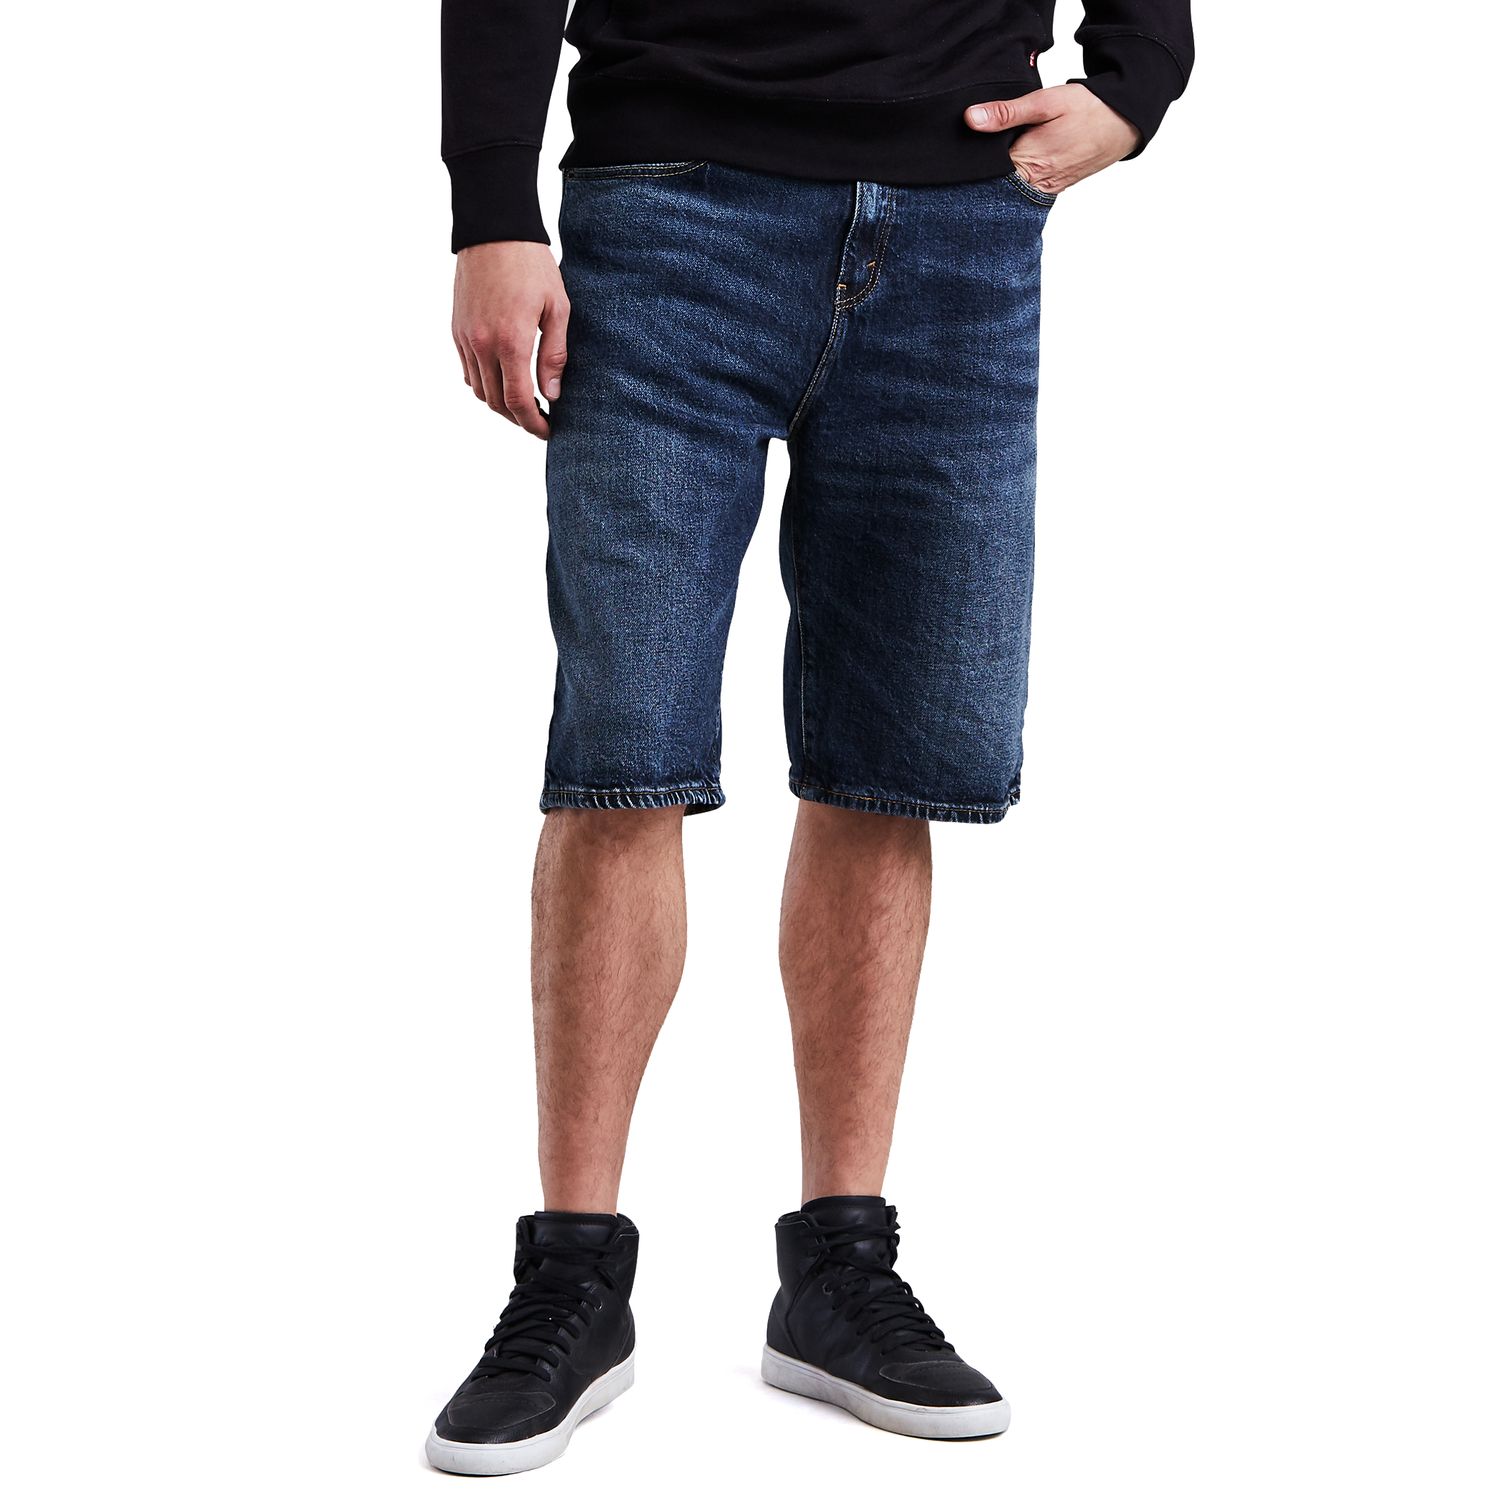 citizens of humanity men's jeans